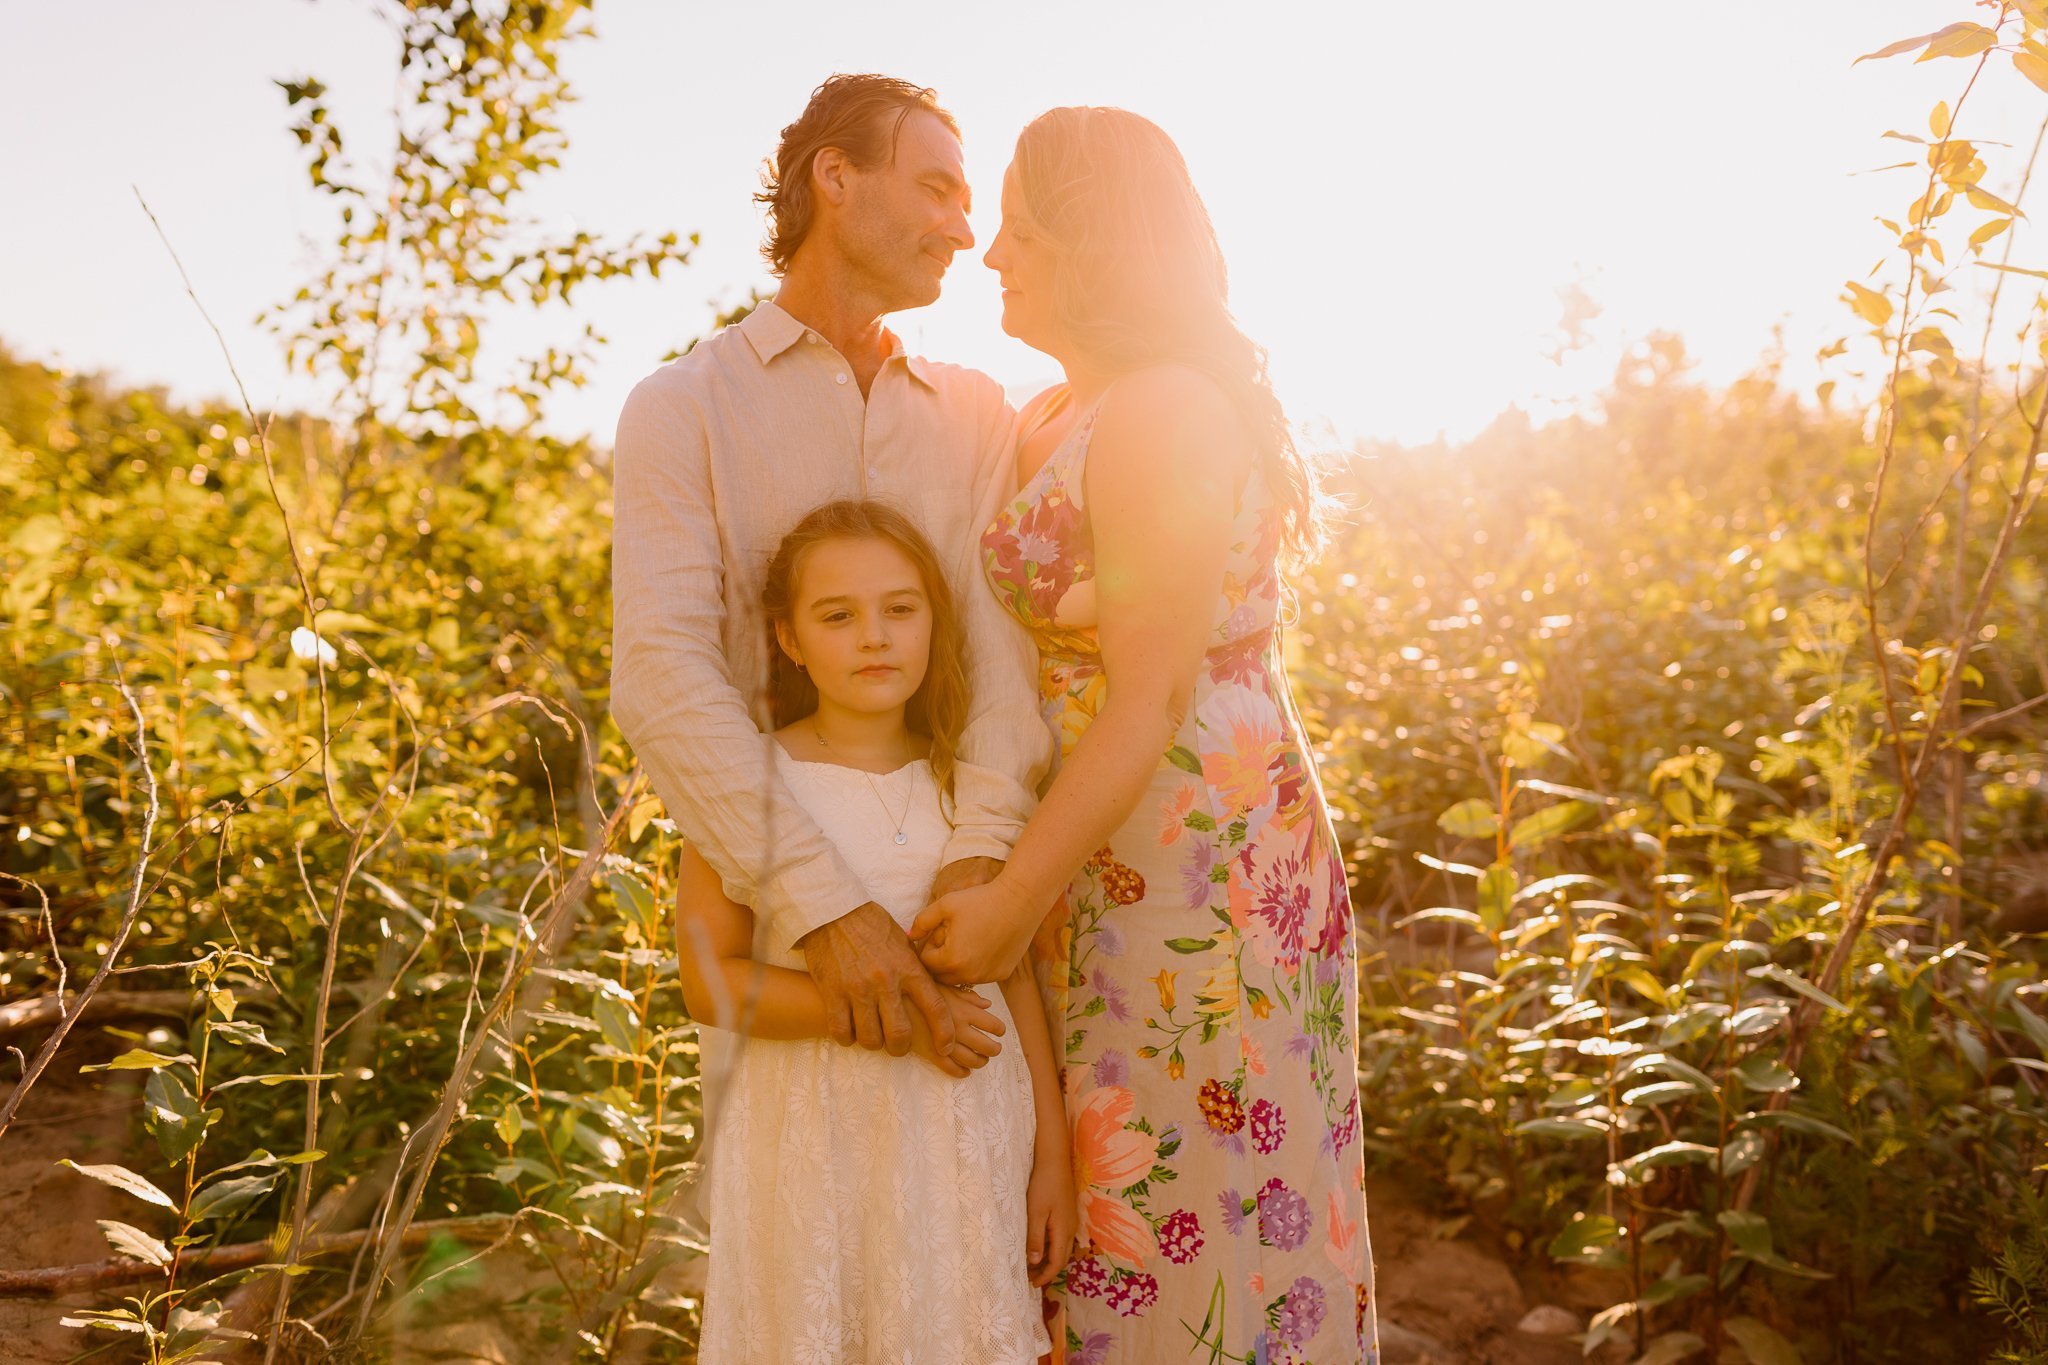 Vedder+River+Family+Session+-+Anna+Hurley+Photography++(20).jpg